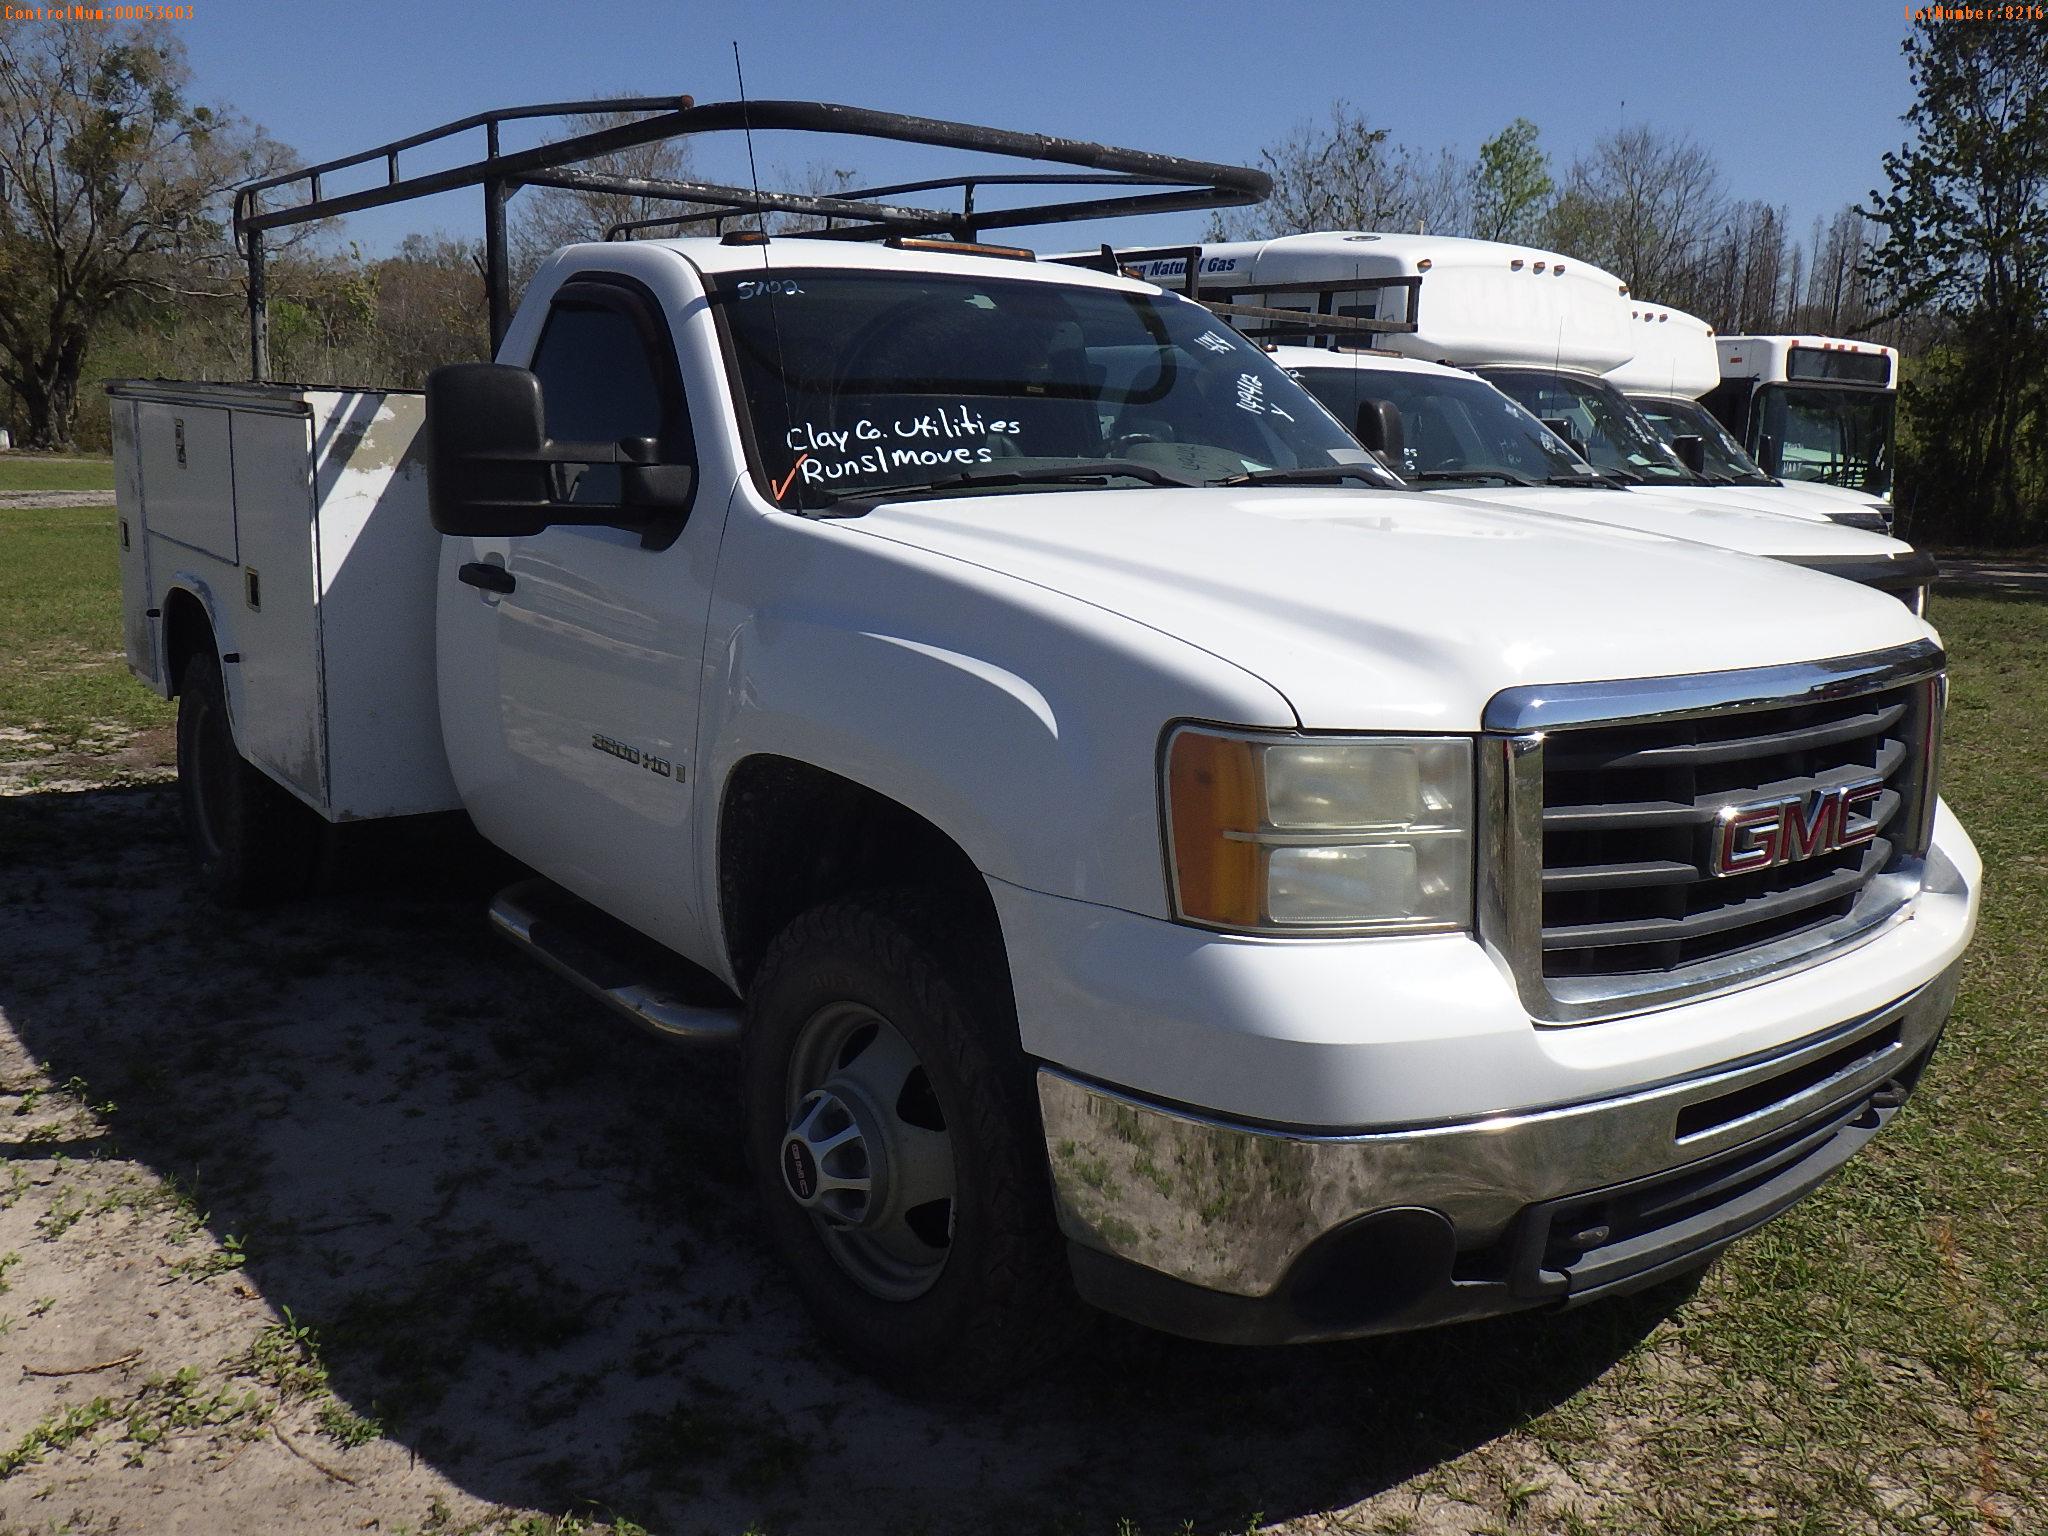 3-08216 (Trucks-Pickup 2D)  Seller: Gov-Clay County Utility Authority 2009 GMC 3